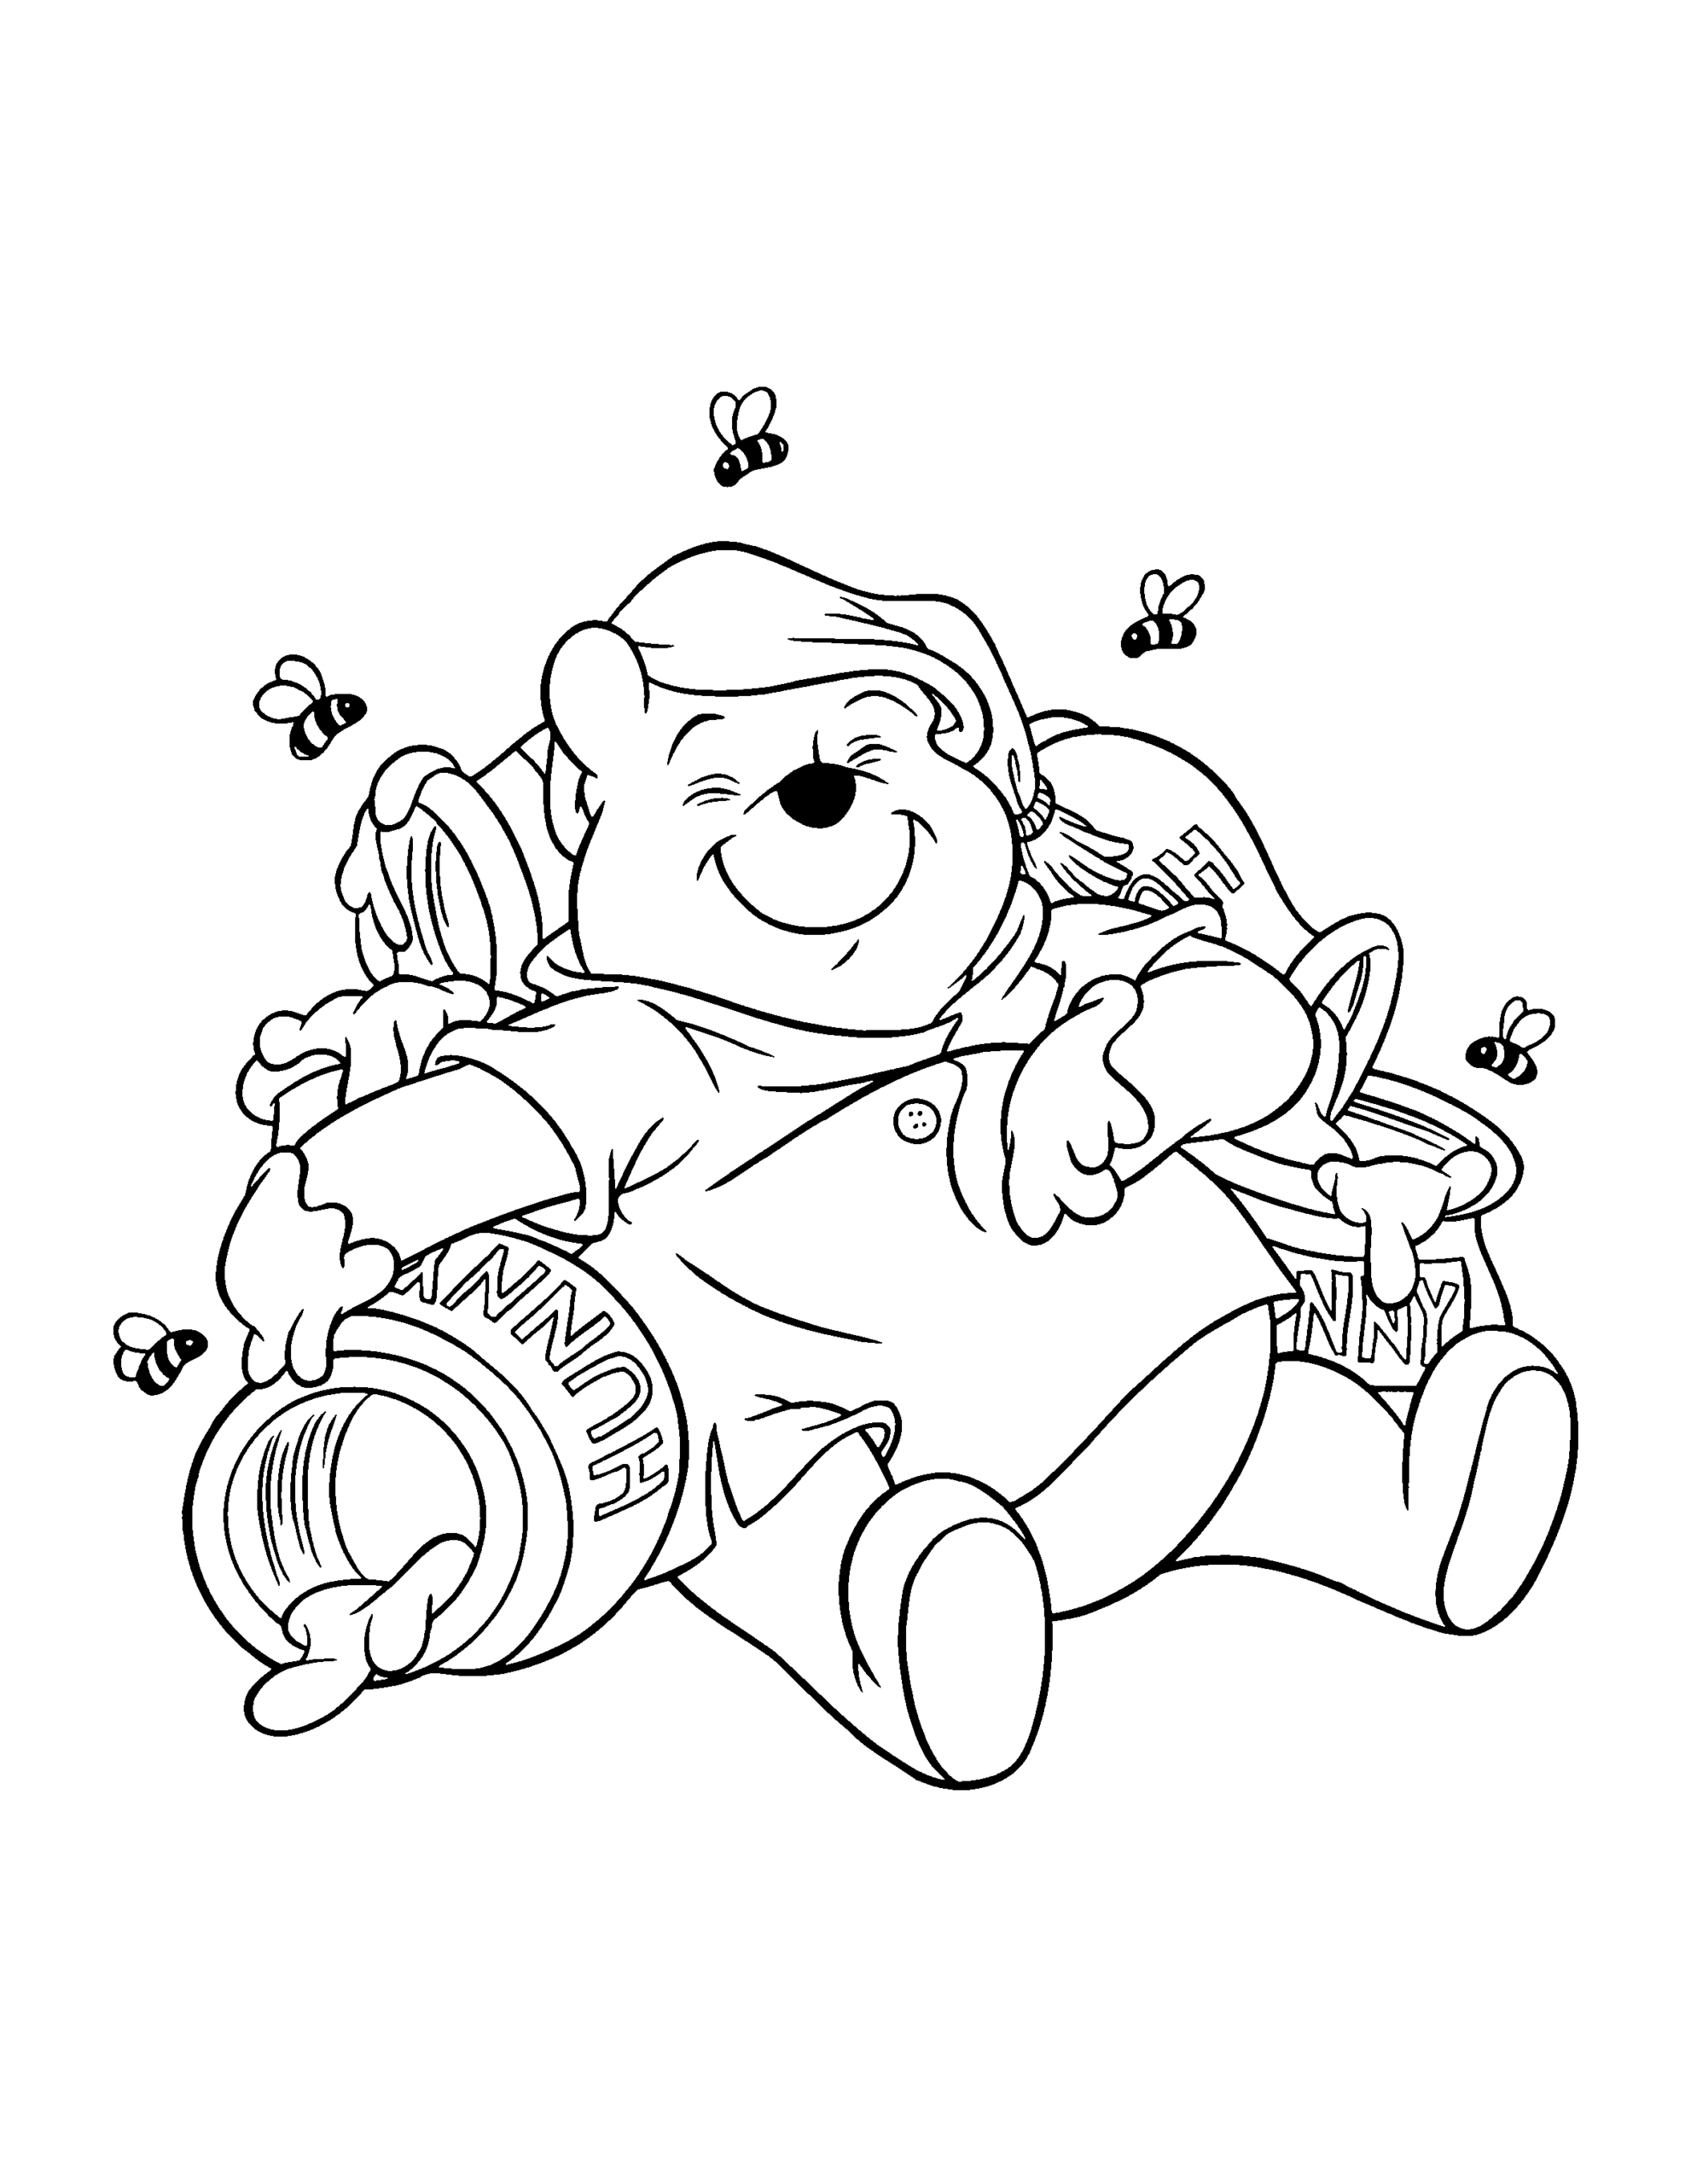 Winnie the Pooh Coloring Pages Cartoons winnie the pooh 87 Printable 2020 7208 Coloring4free